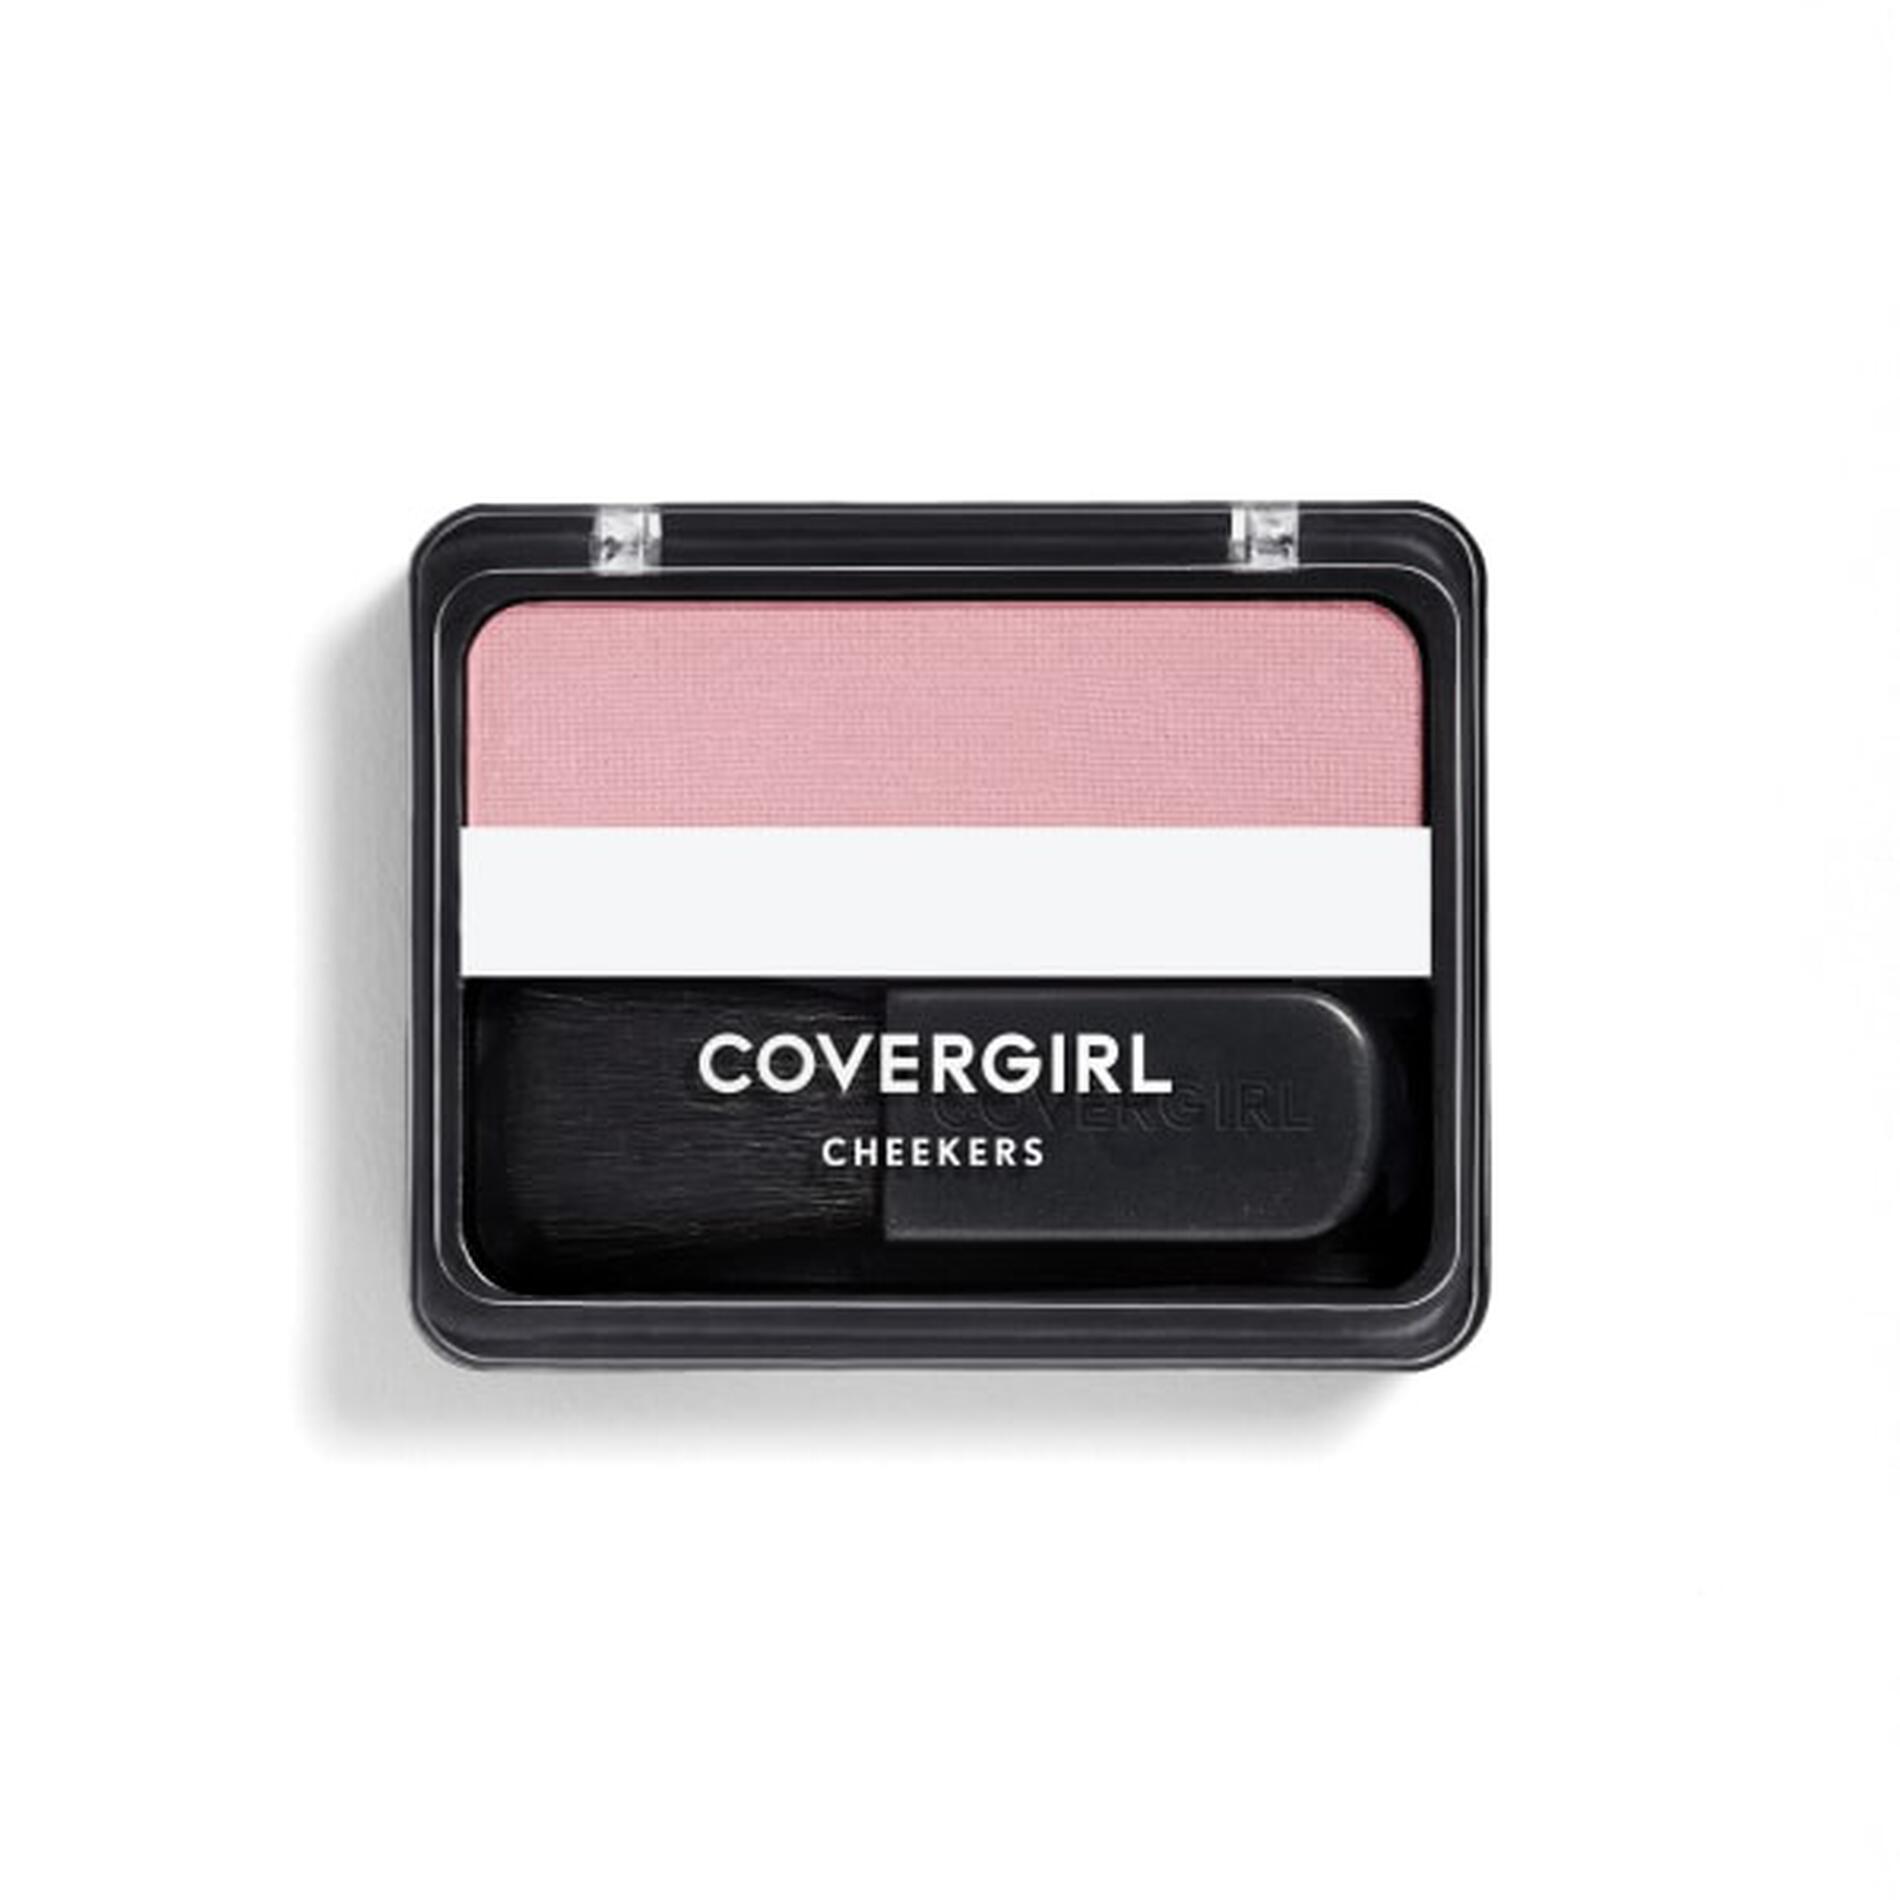 COVERGIRL Cheekers Blendable Powder Blush Natural Rose